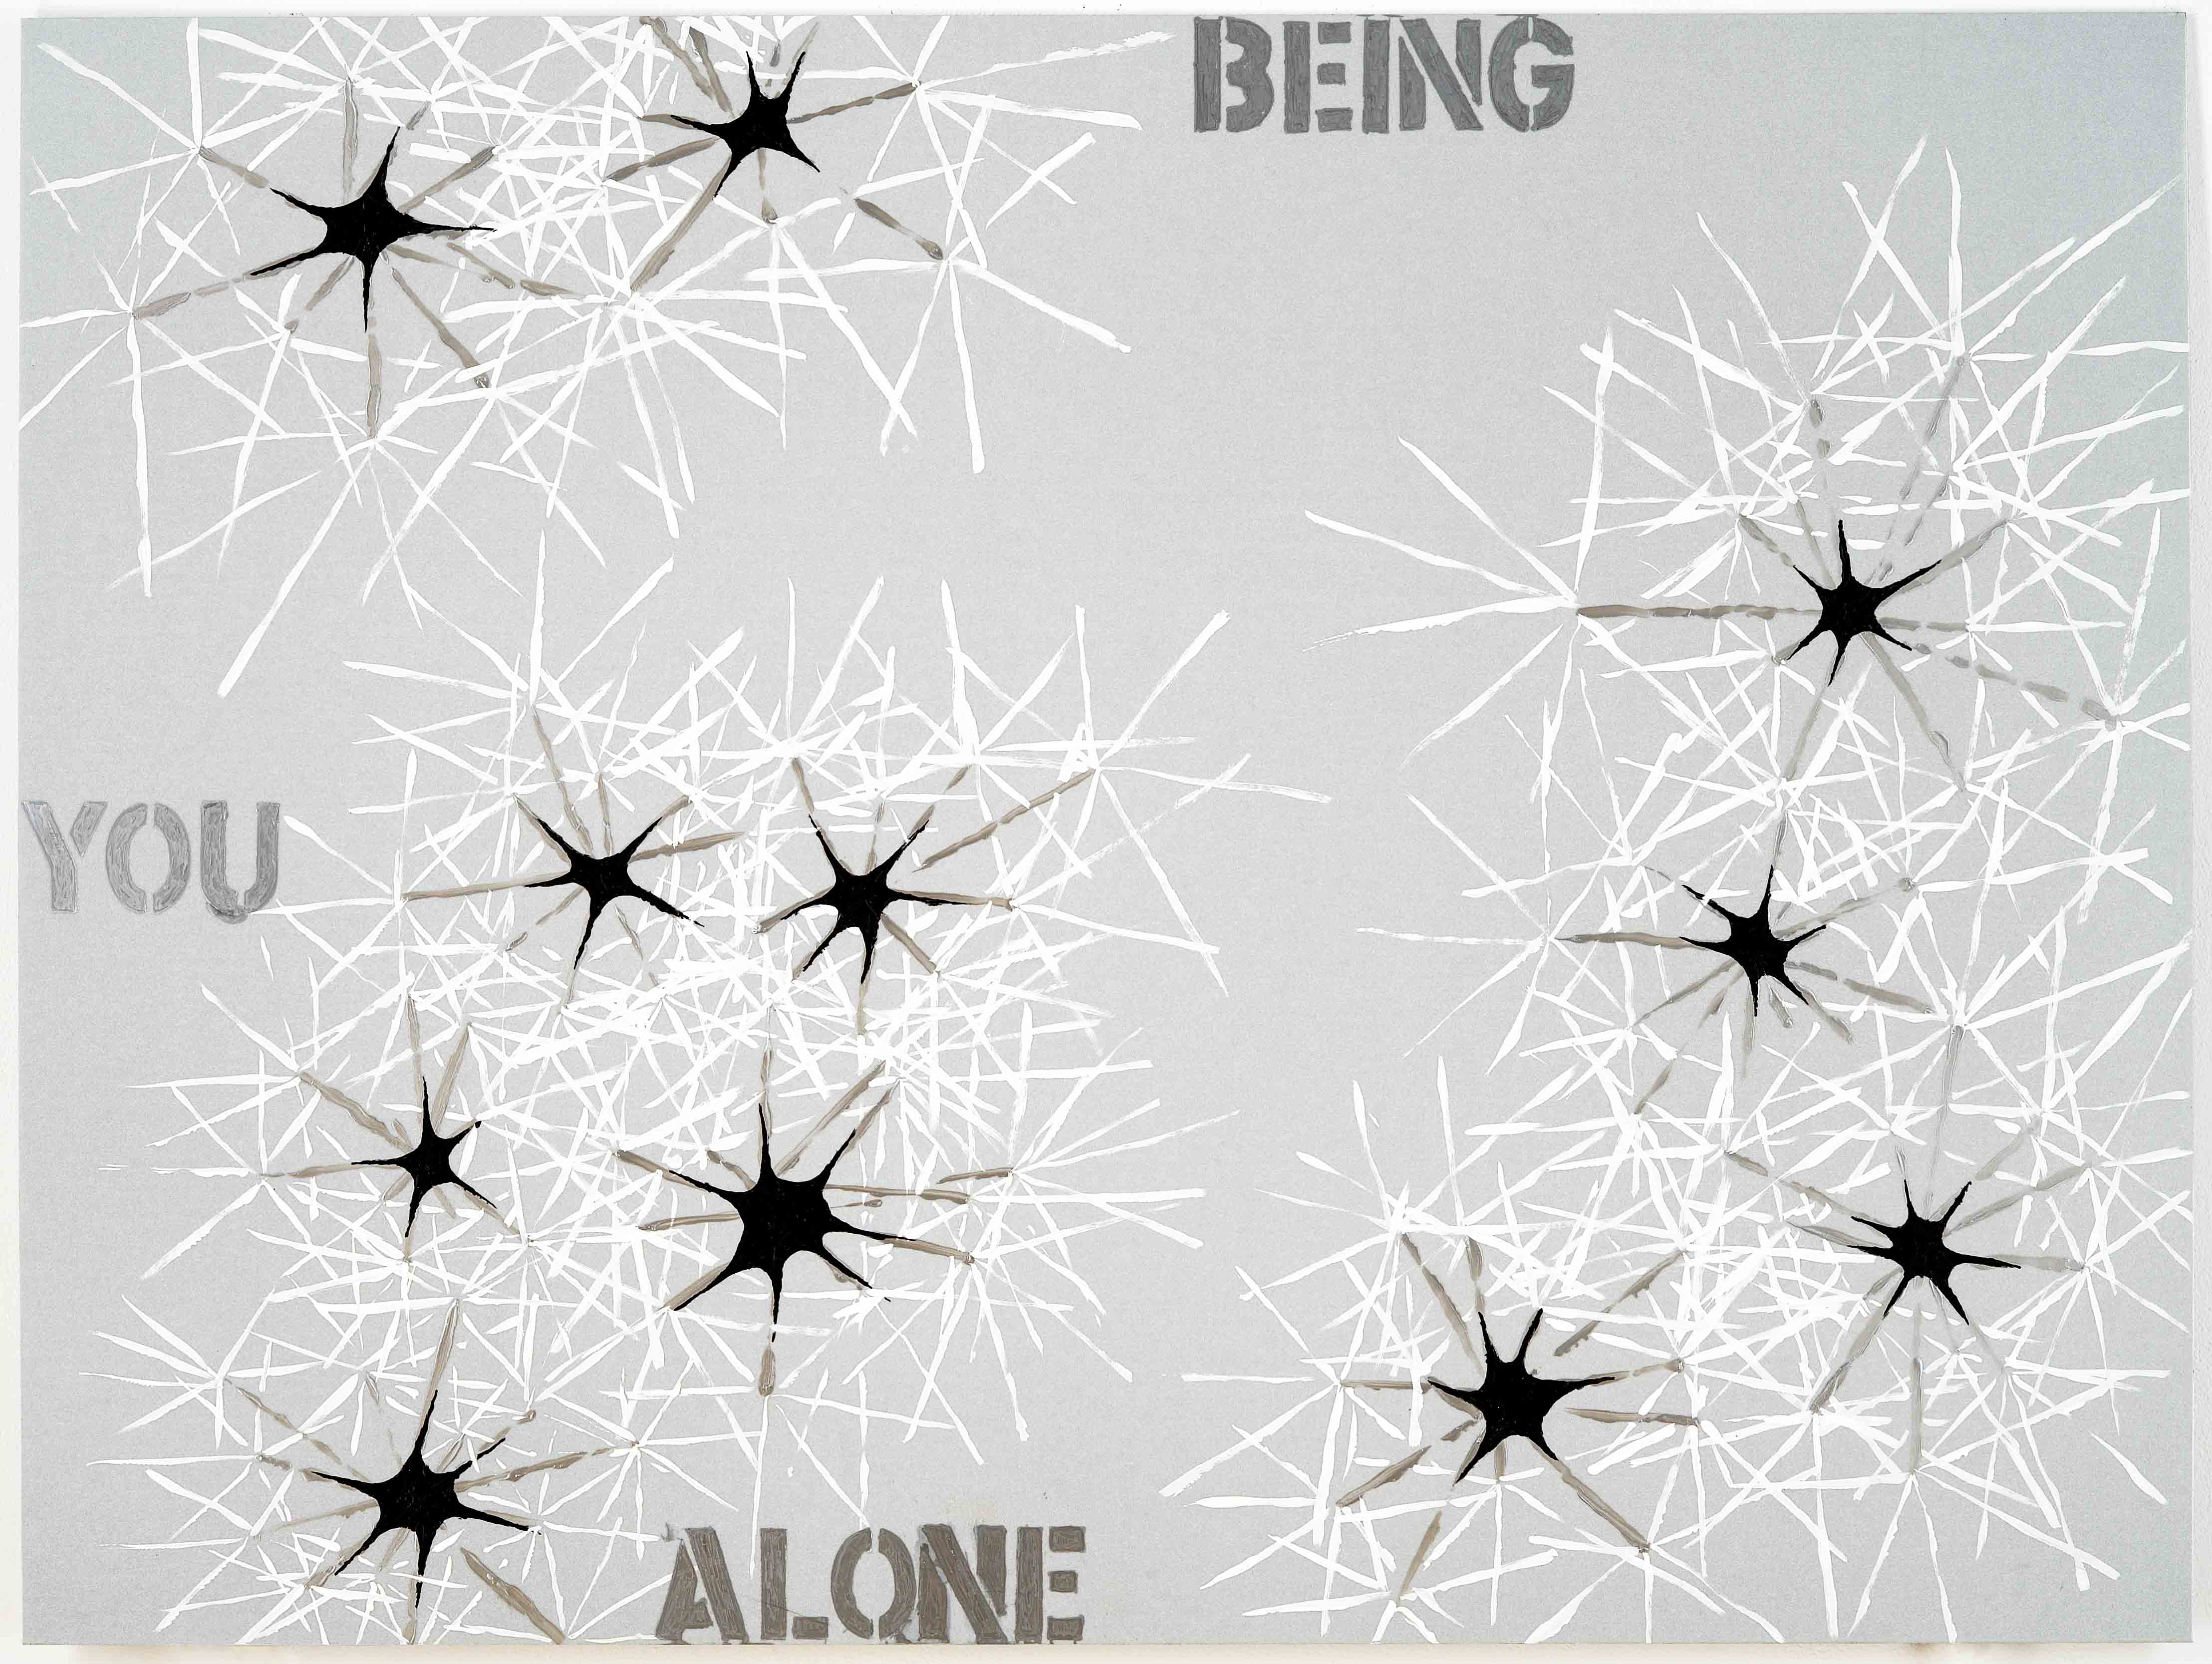 You being alone